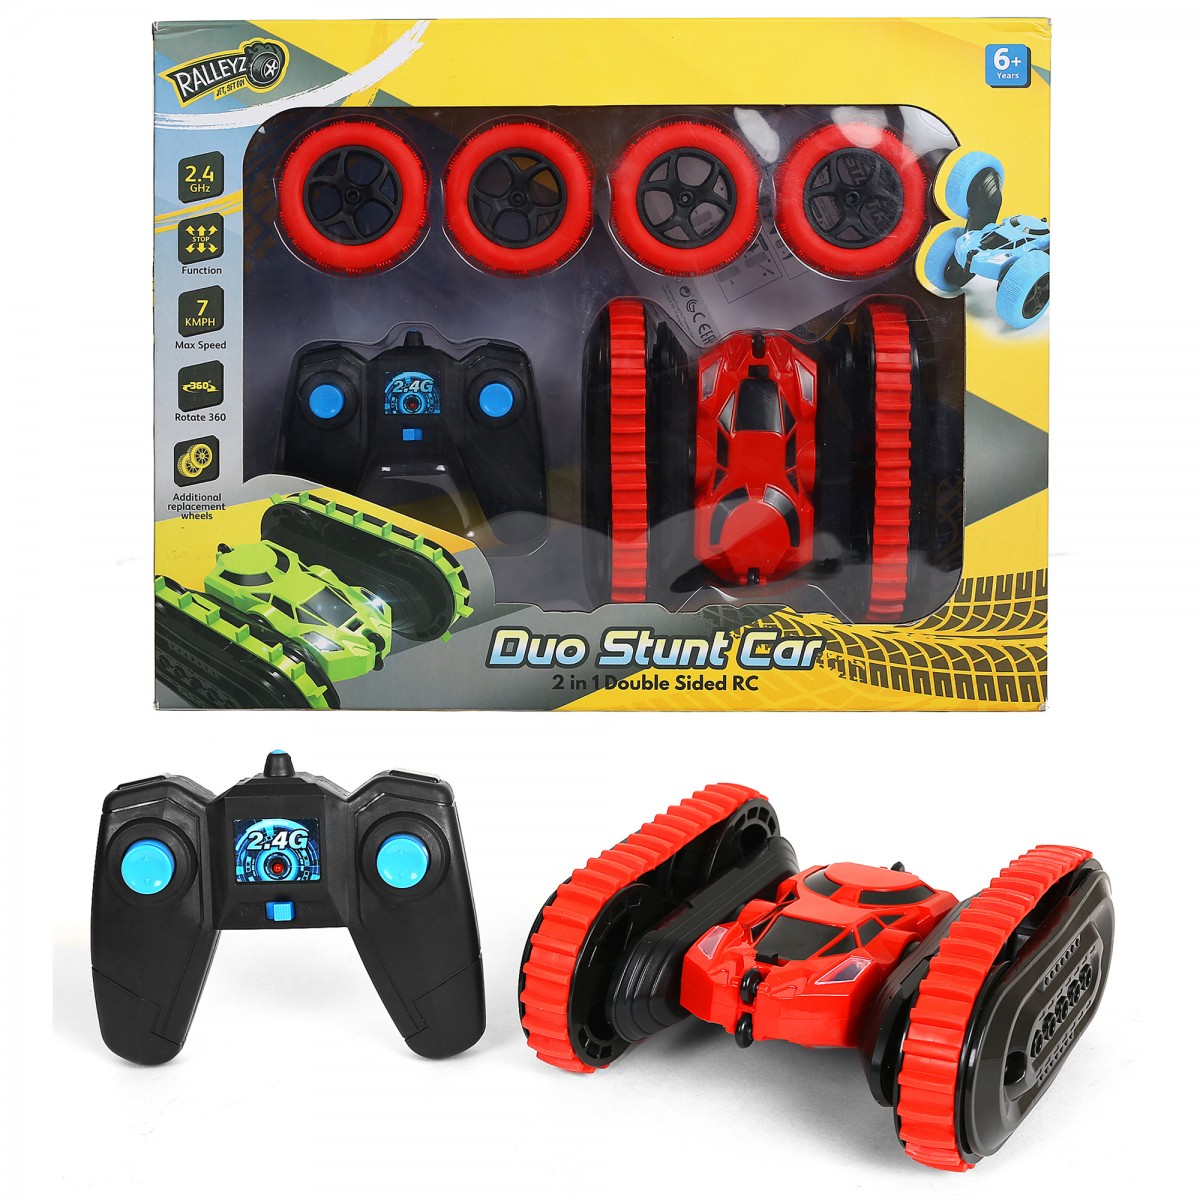 Ralleyz 2.4G 2 In1 Remote Control Stunt Car, Changeable Wheels With Charger, Red, 6Y+